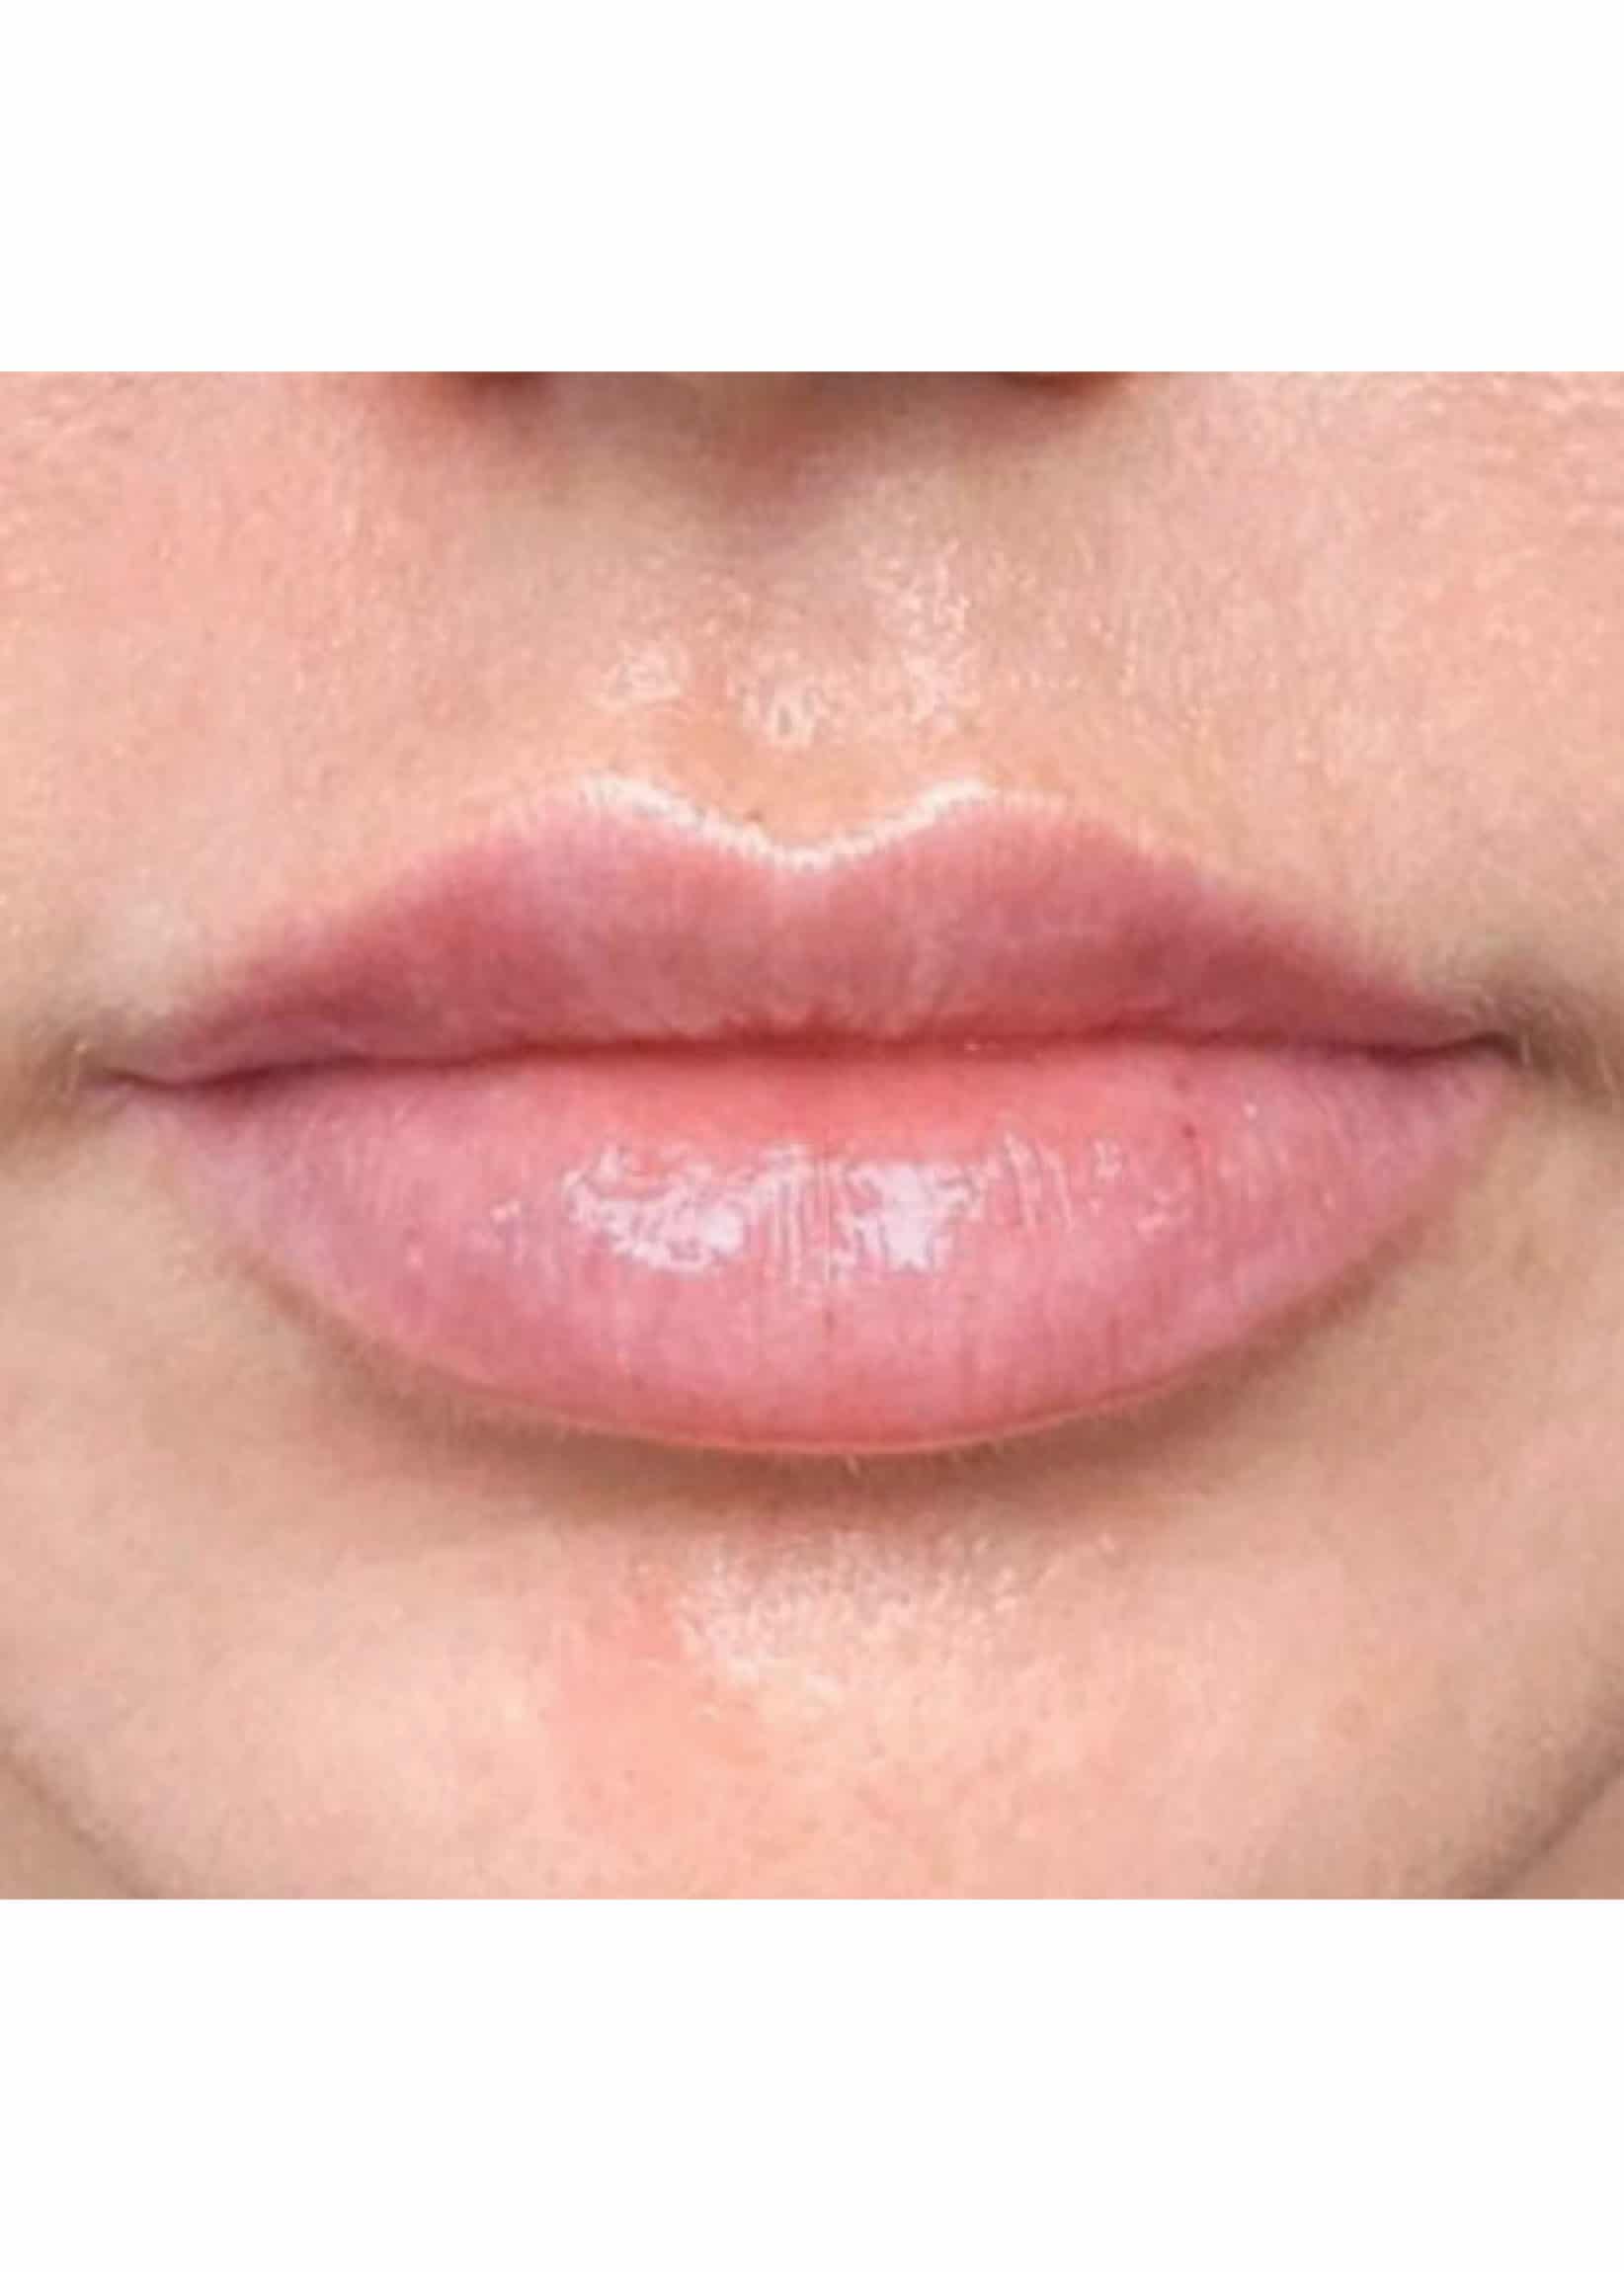 TheSkinCenter ProviderPages JonnaBlum LipFiller After 6 scaled 1